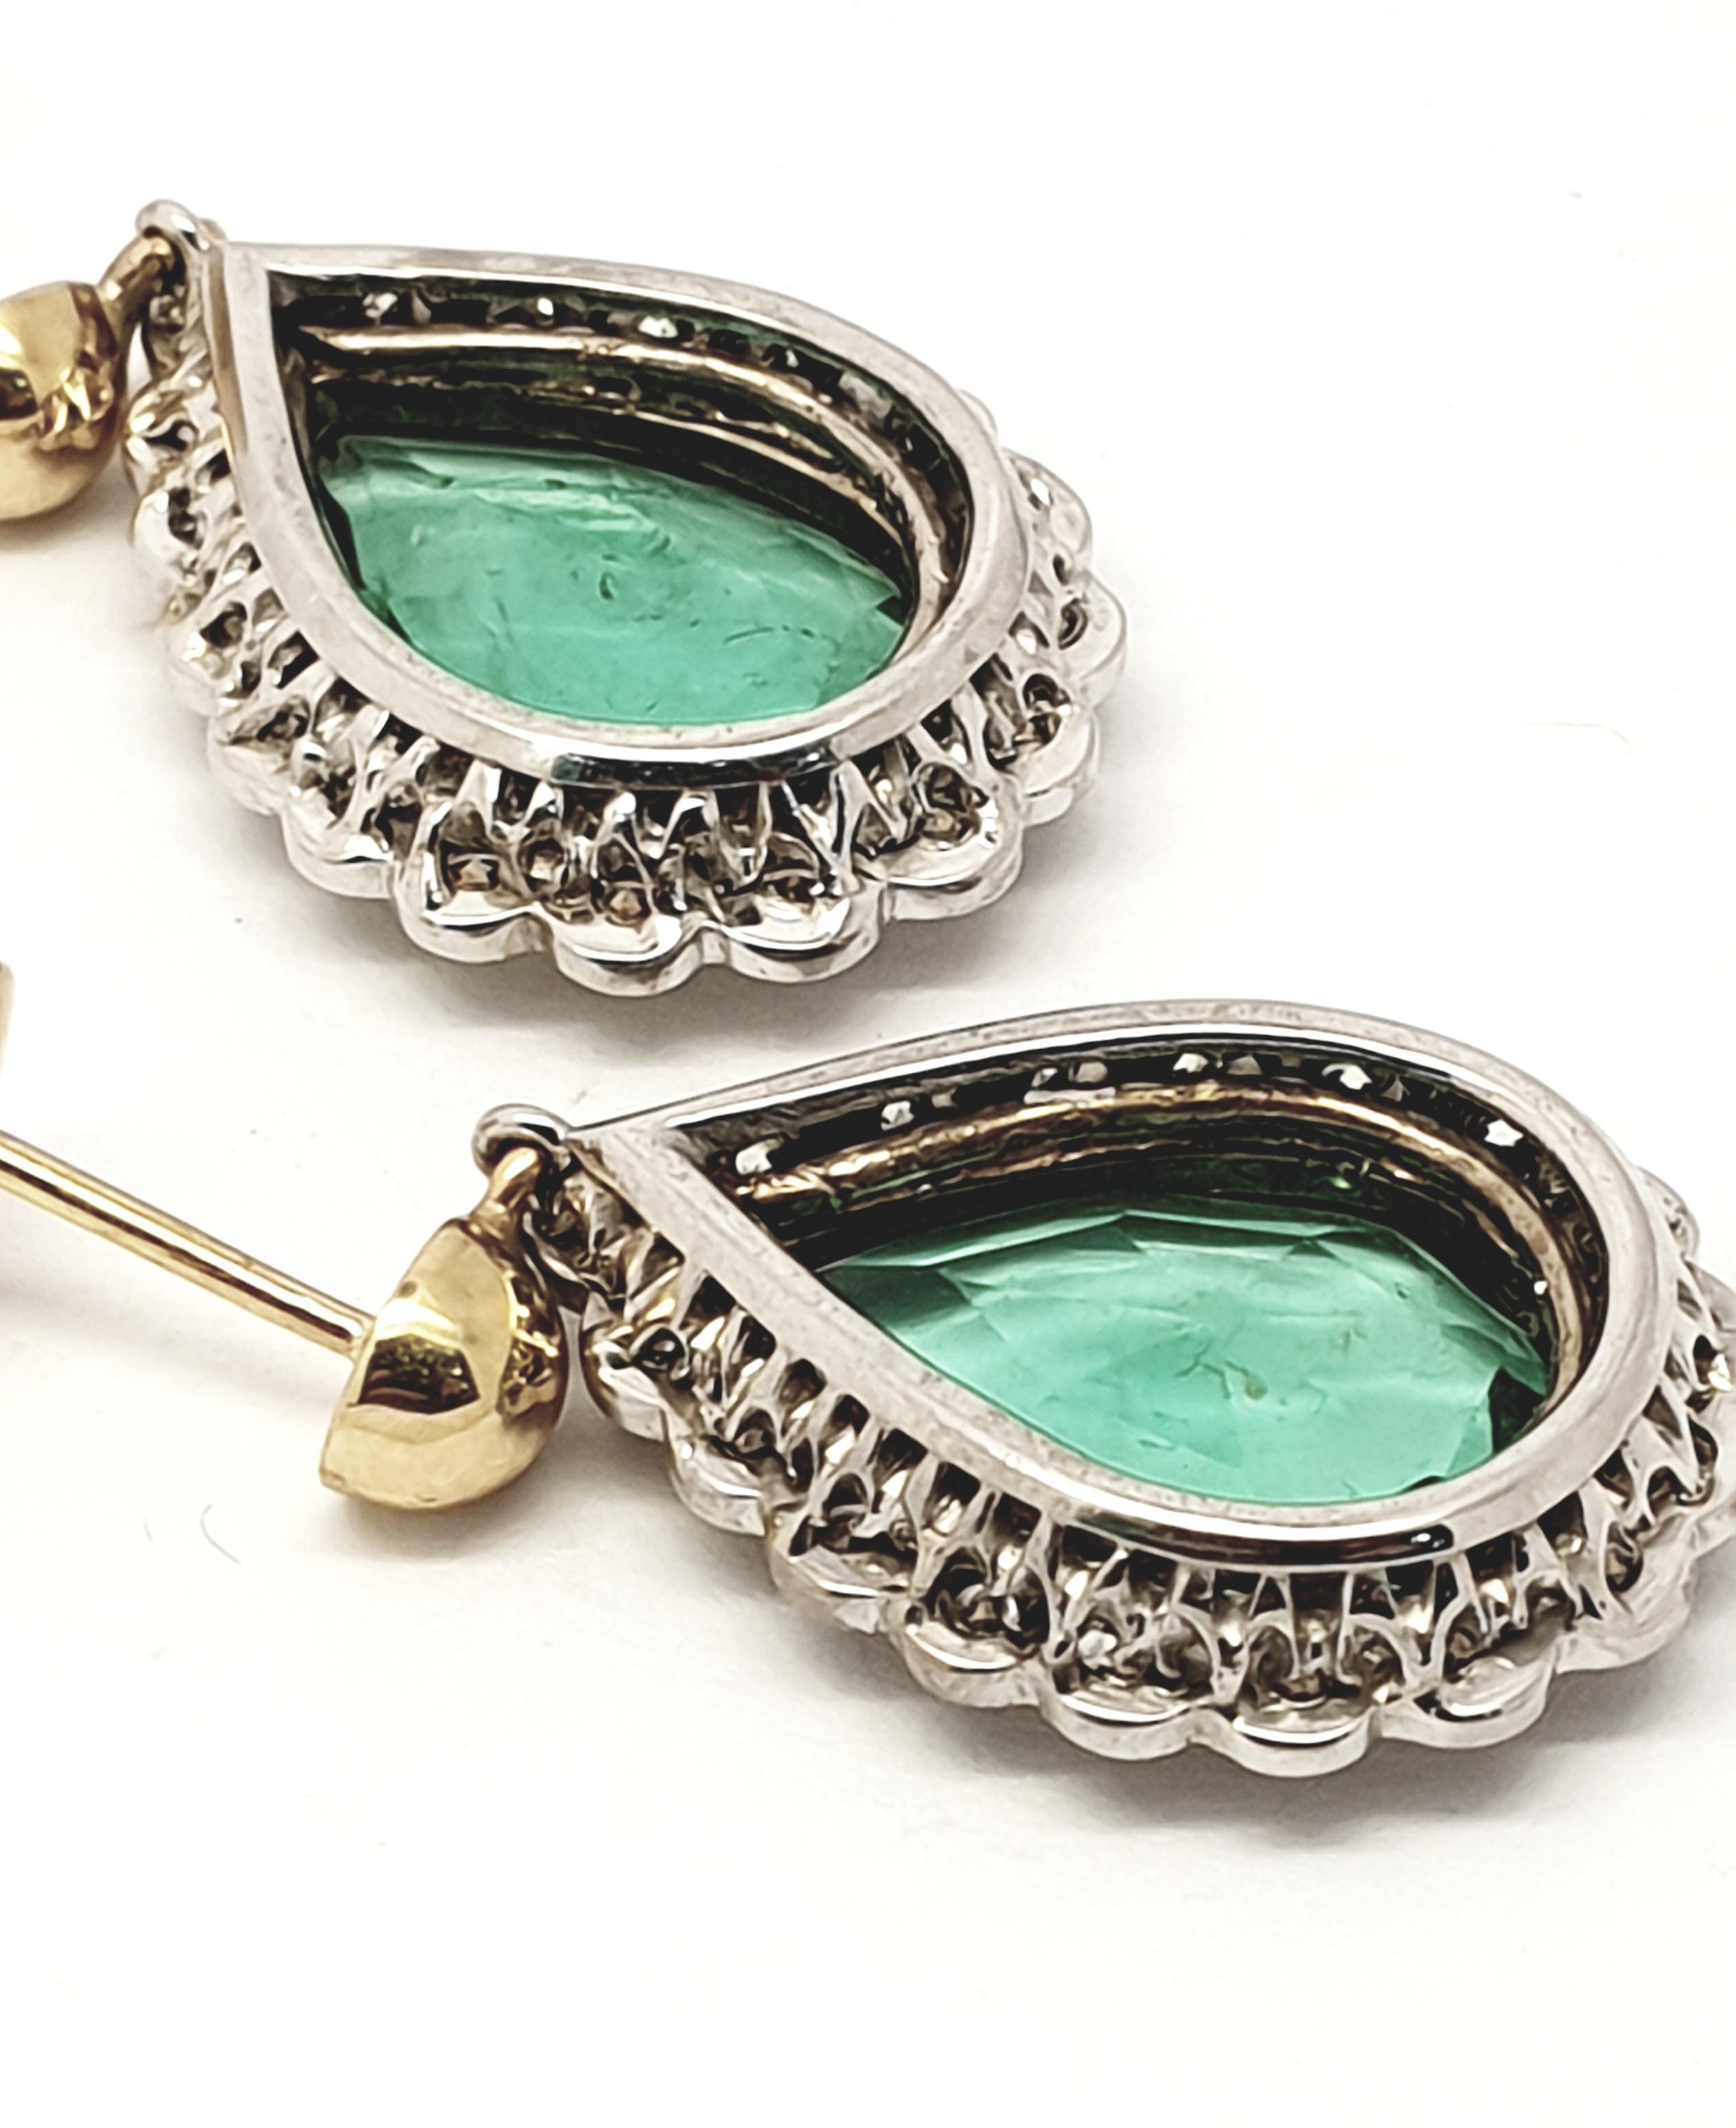 Emerald diamond cluster drop  earrings.Each  one set with one pear cut emerald in rubbed over setting in yellow gold.
This is surrounded by eighteen round brilliant cut diamonds set in white gold.
The back is hallmarked. Size of the emeralds 3 ct